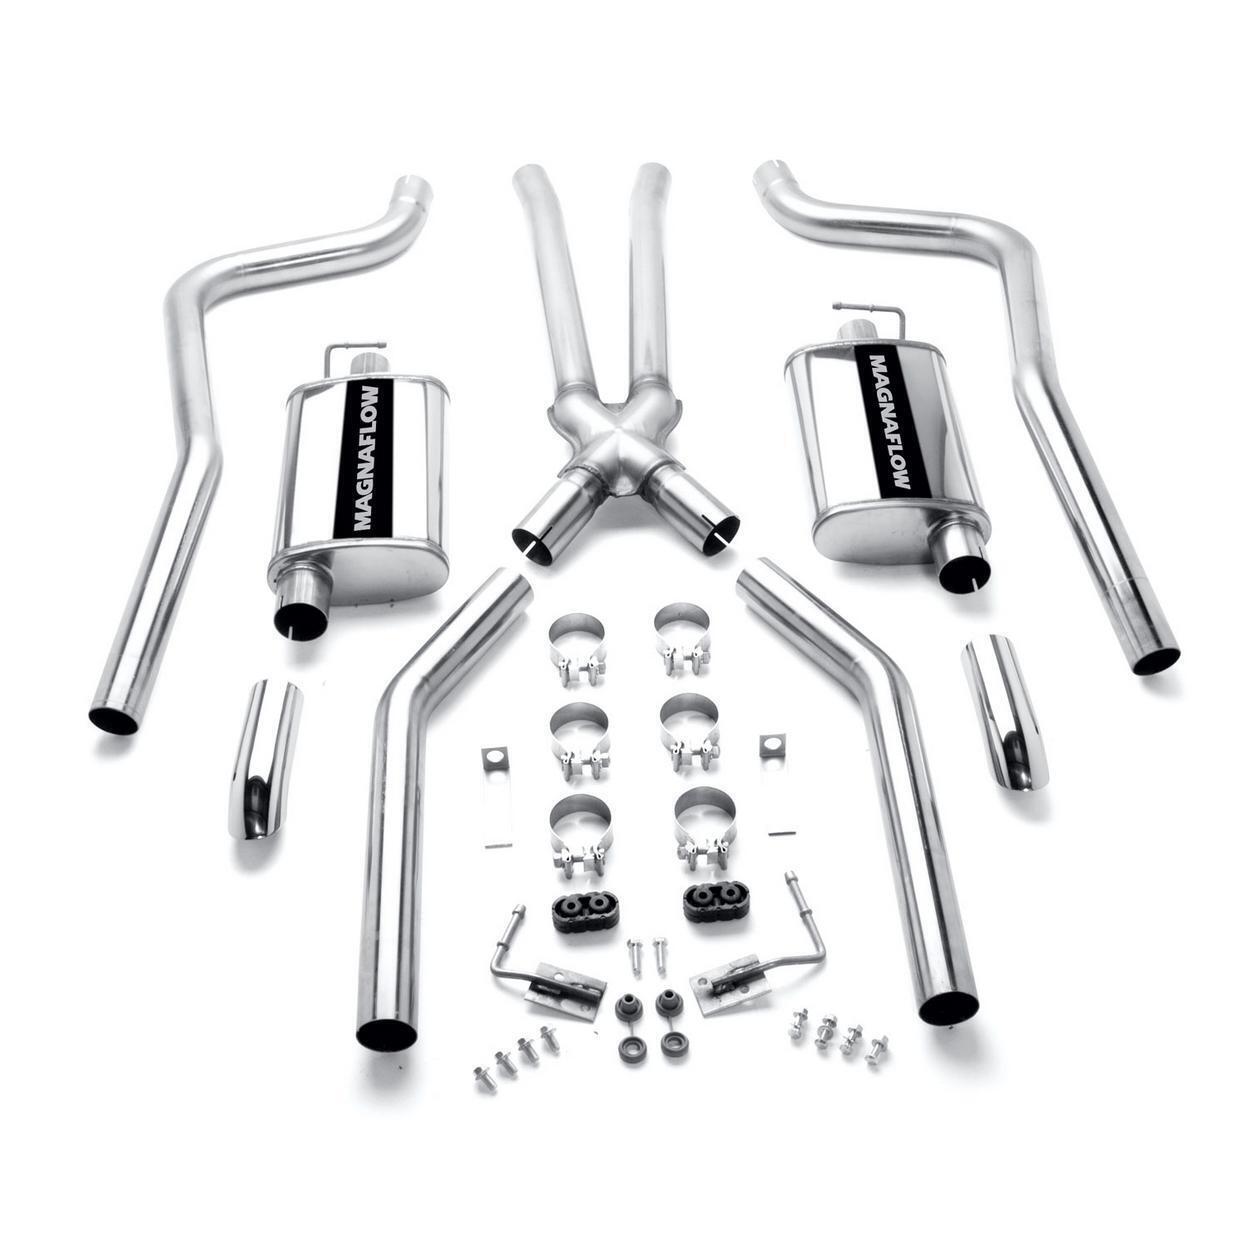 Magnaflow Exhaust System Kit for 1970 Plymouth Barracuda 3.7L L6 GAS OHV